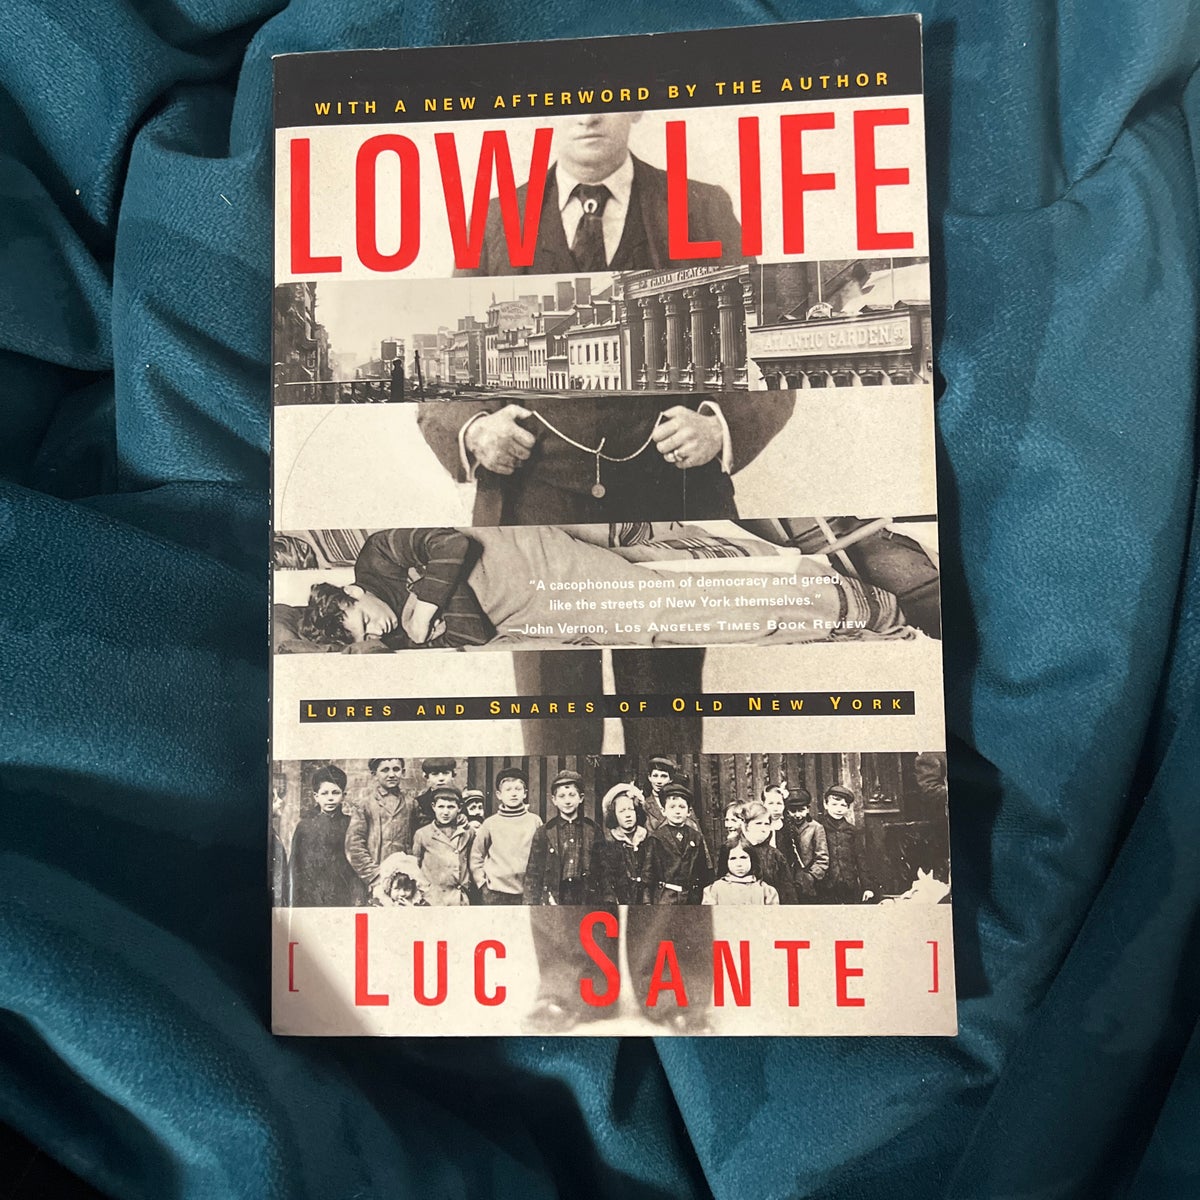 Low Life: Lures and Snares of Old New York [Book]